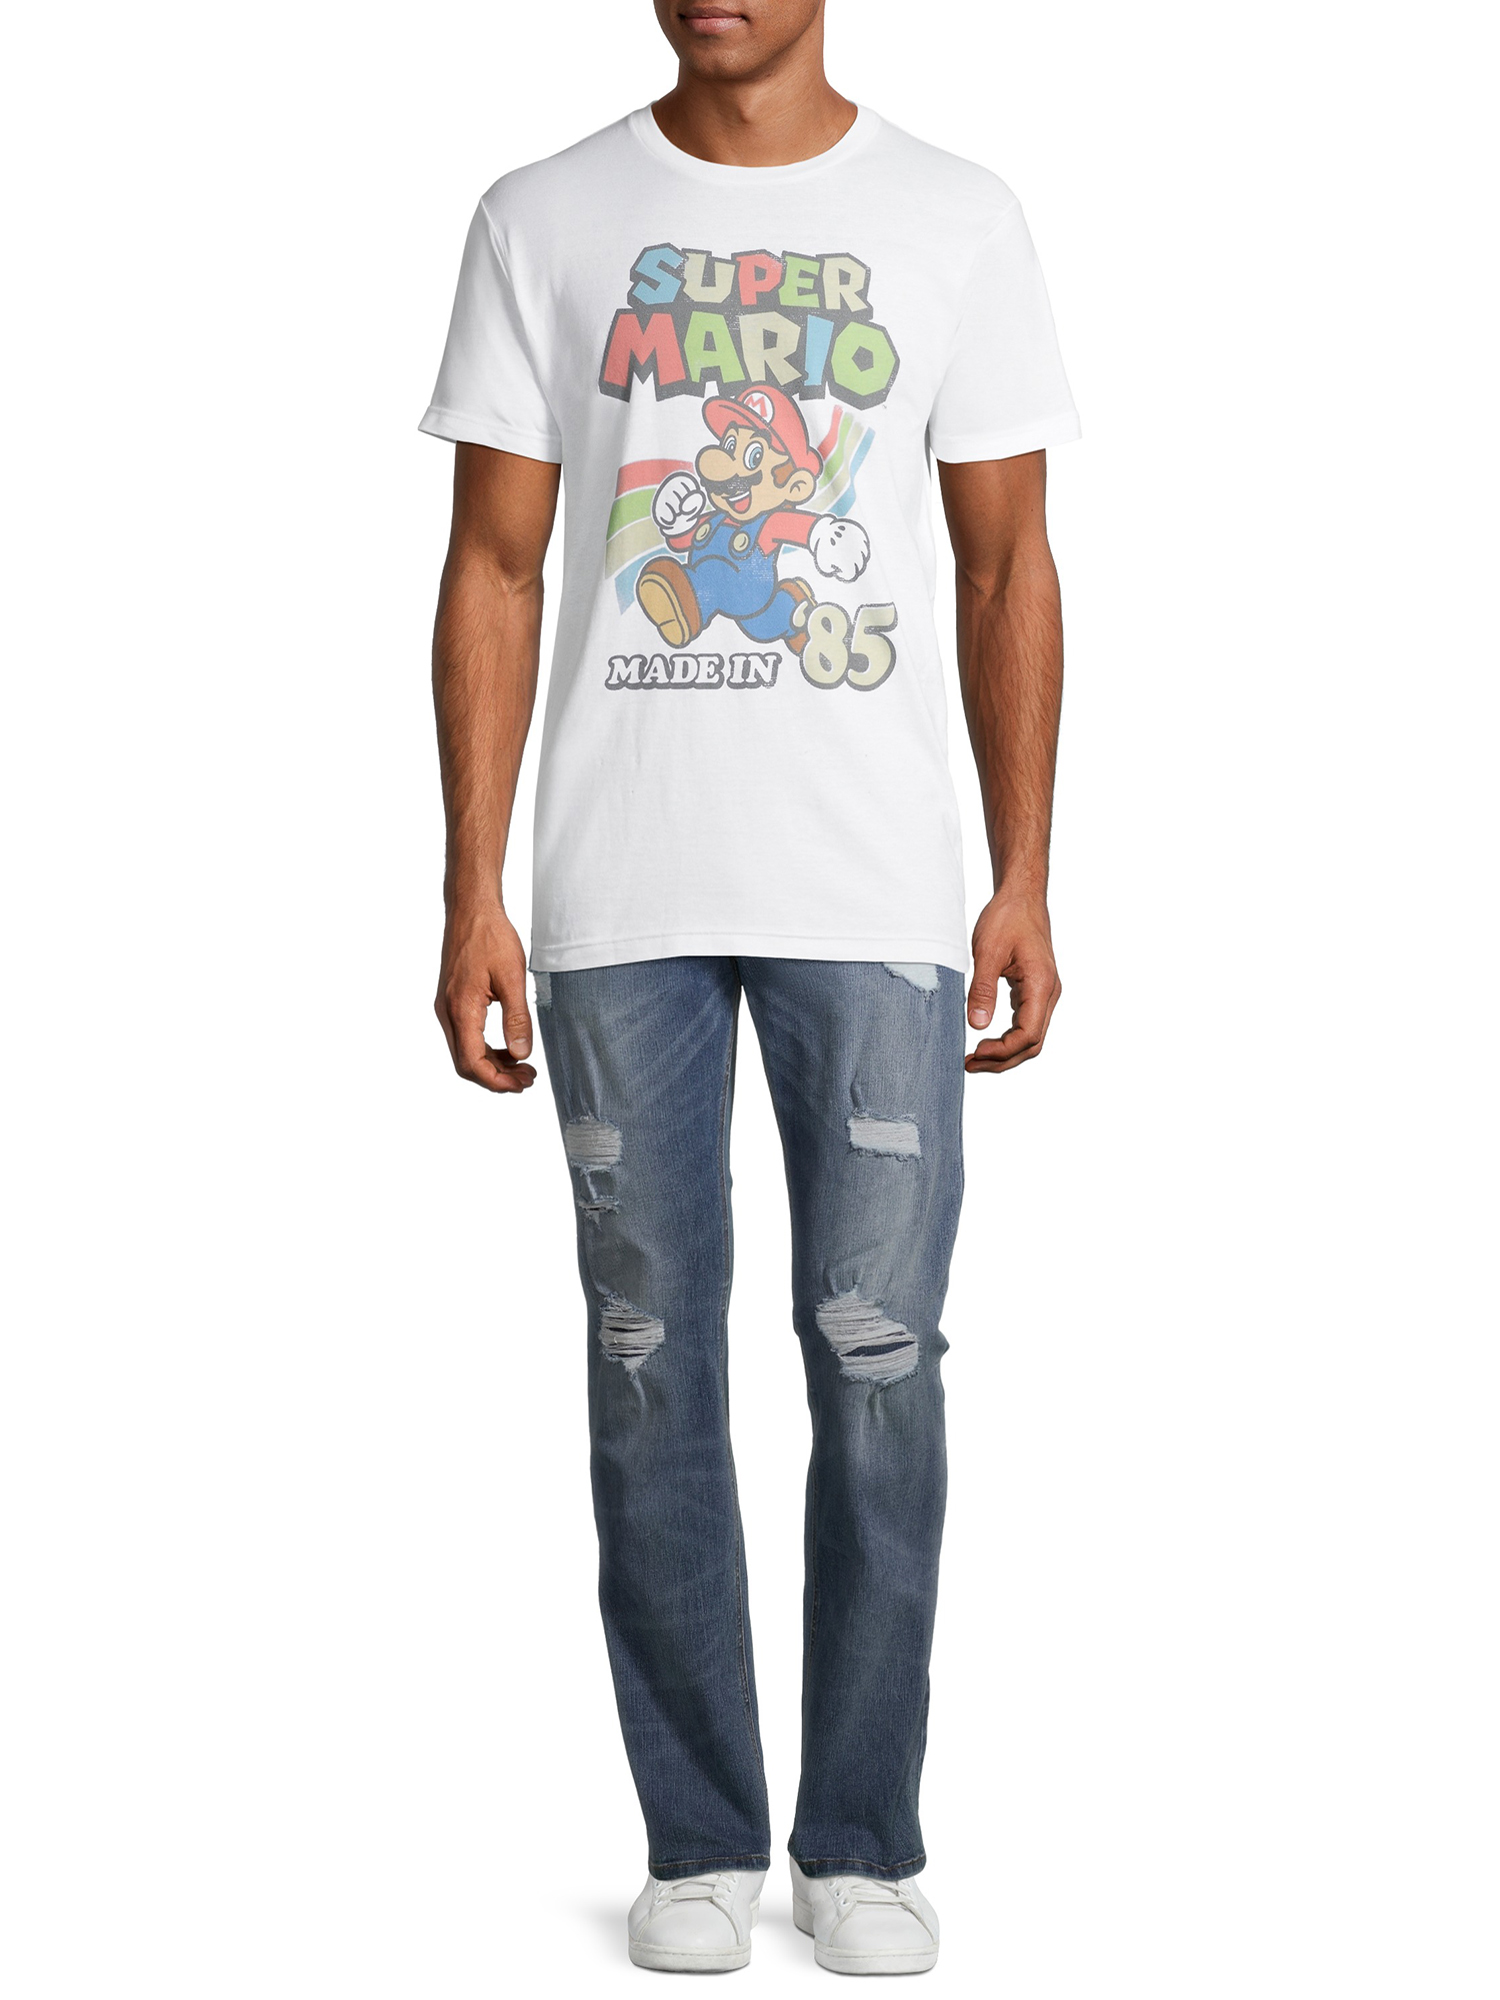 Nintendo Super Mario Crew & Made In The 80's Men's and Big Men's Graphic T-Shirts, 2-Pack - image 2 of 11